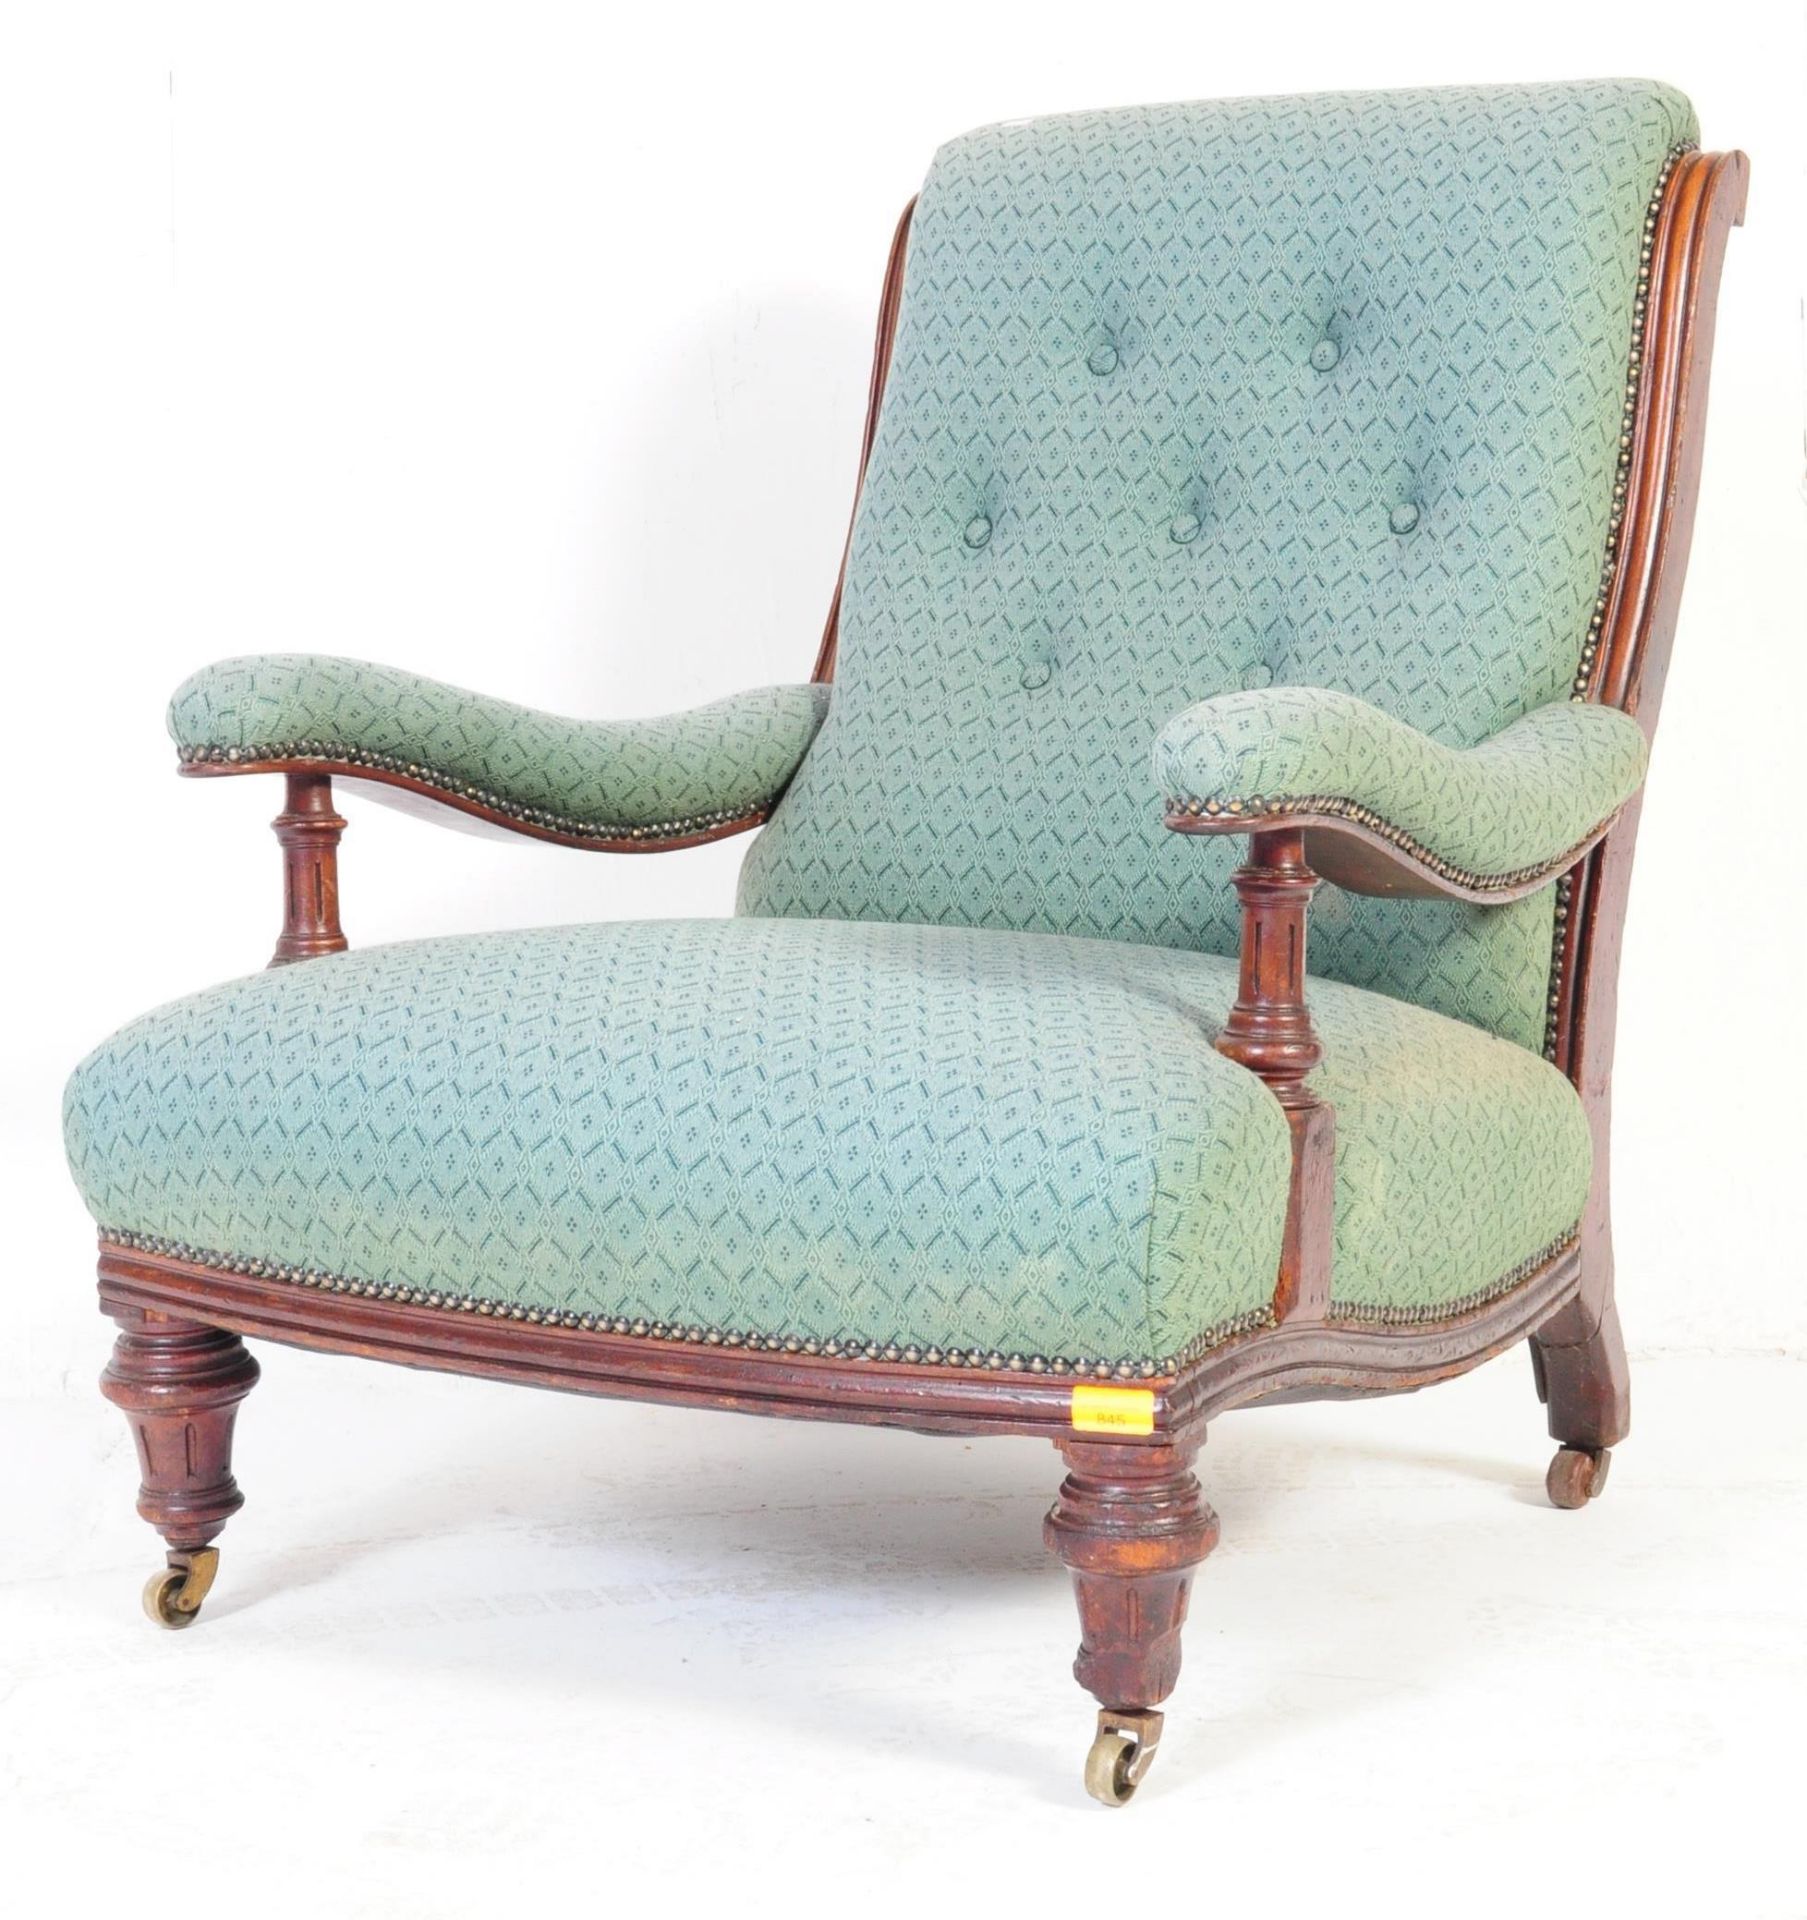 EARLY 20TH CENTURY GENTLEMANS LIBRARY CHAIR